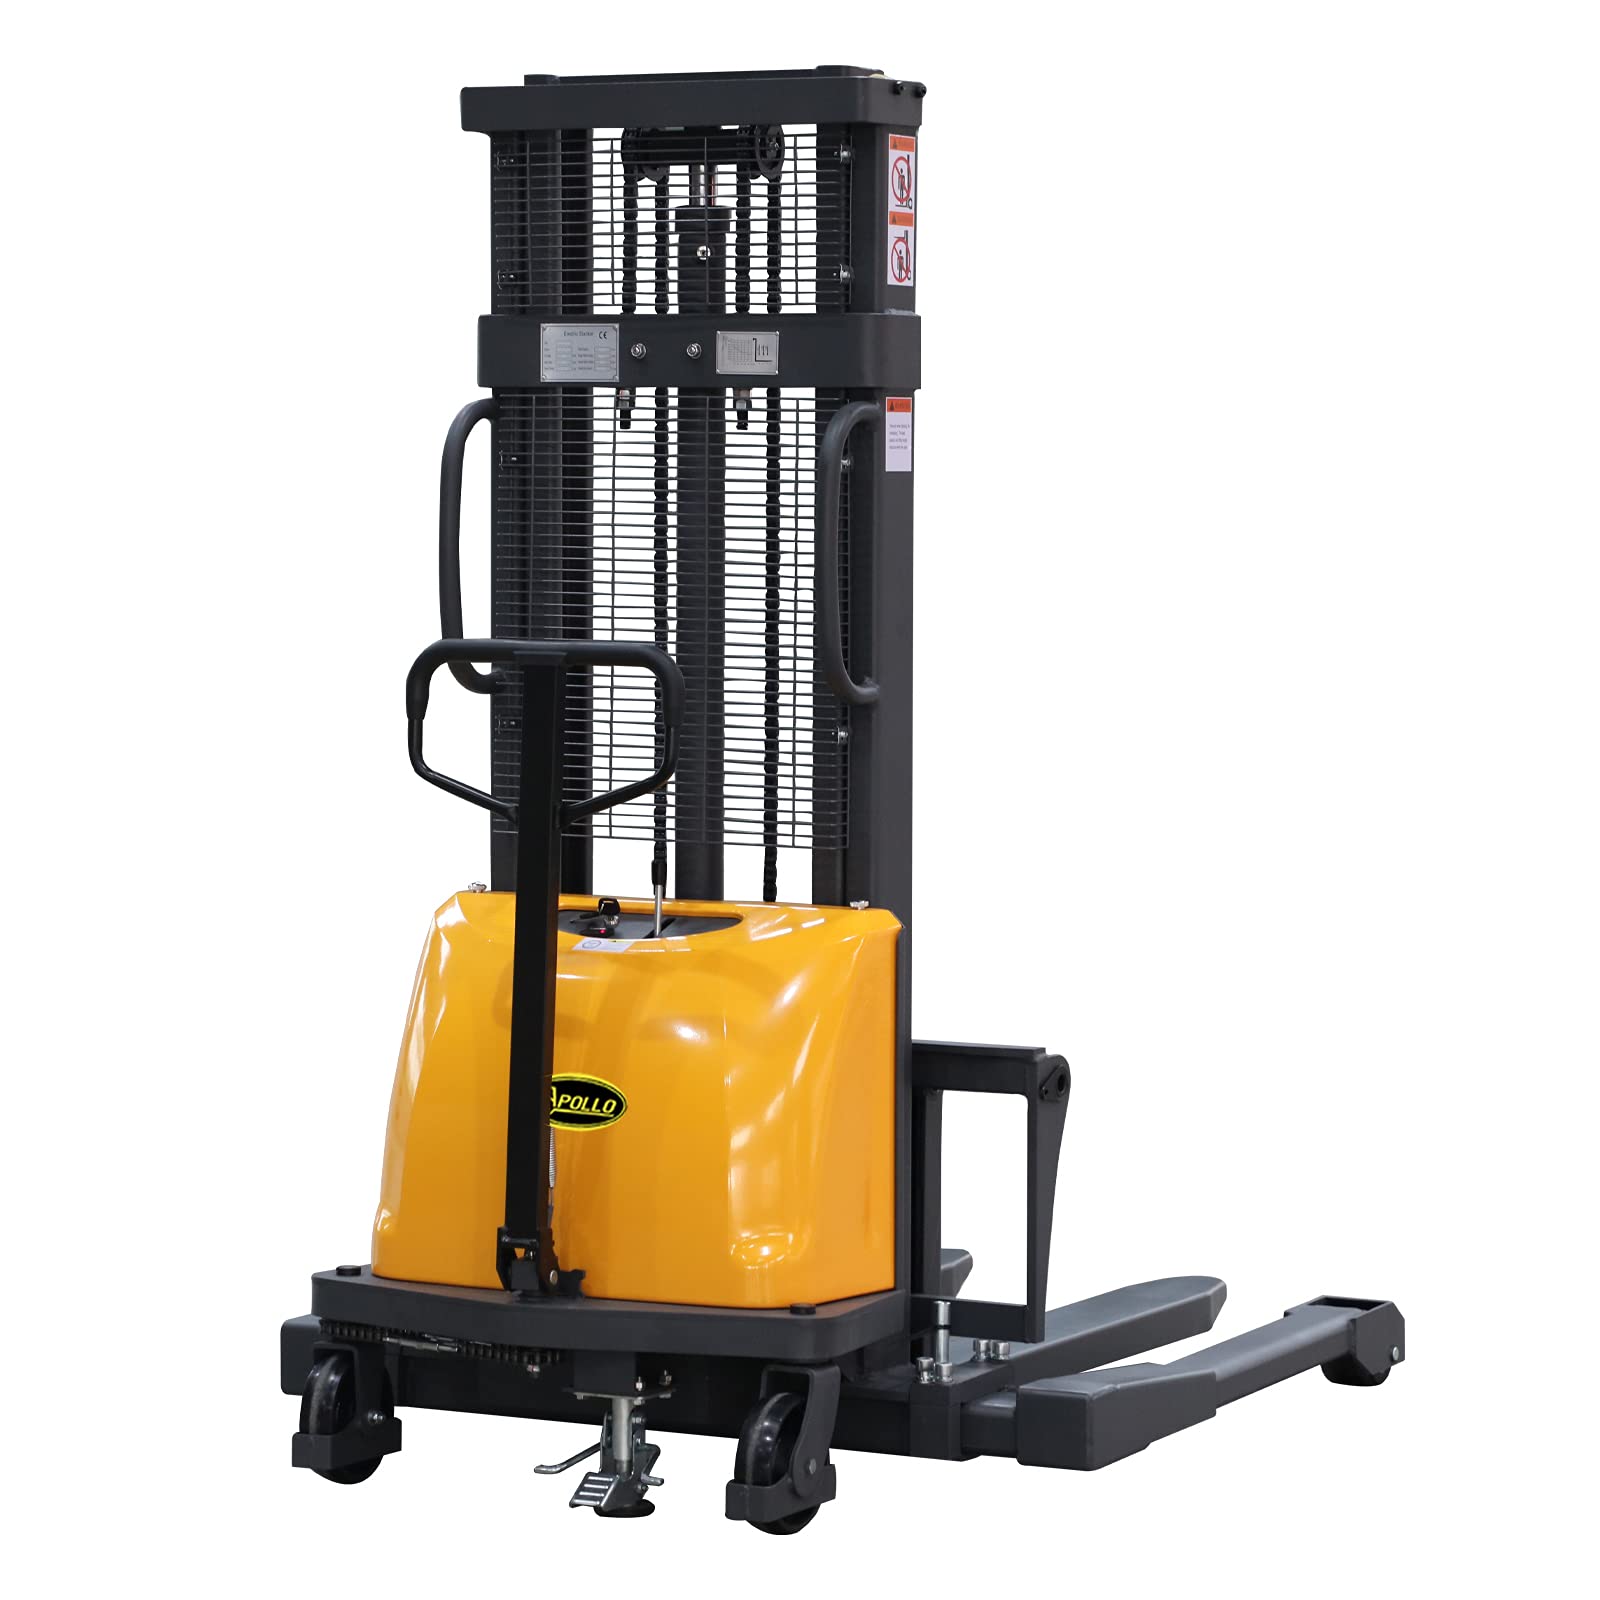 Economy Semi Electric Pallet Stacker 98inch Lifting Height Material Lifter for Warehouse 3300lbs Capacity Straddle Legs with Adjustable Forks